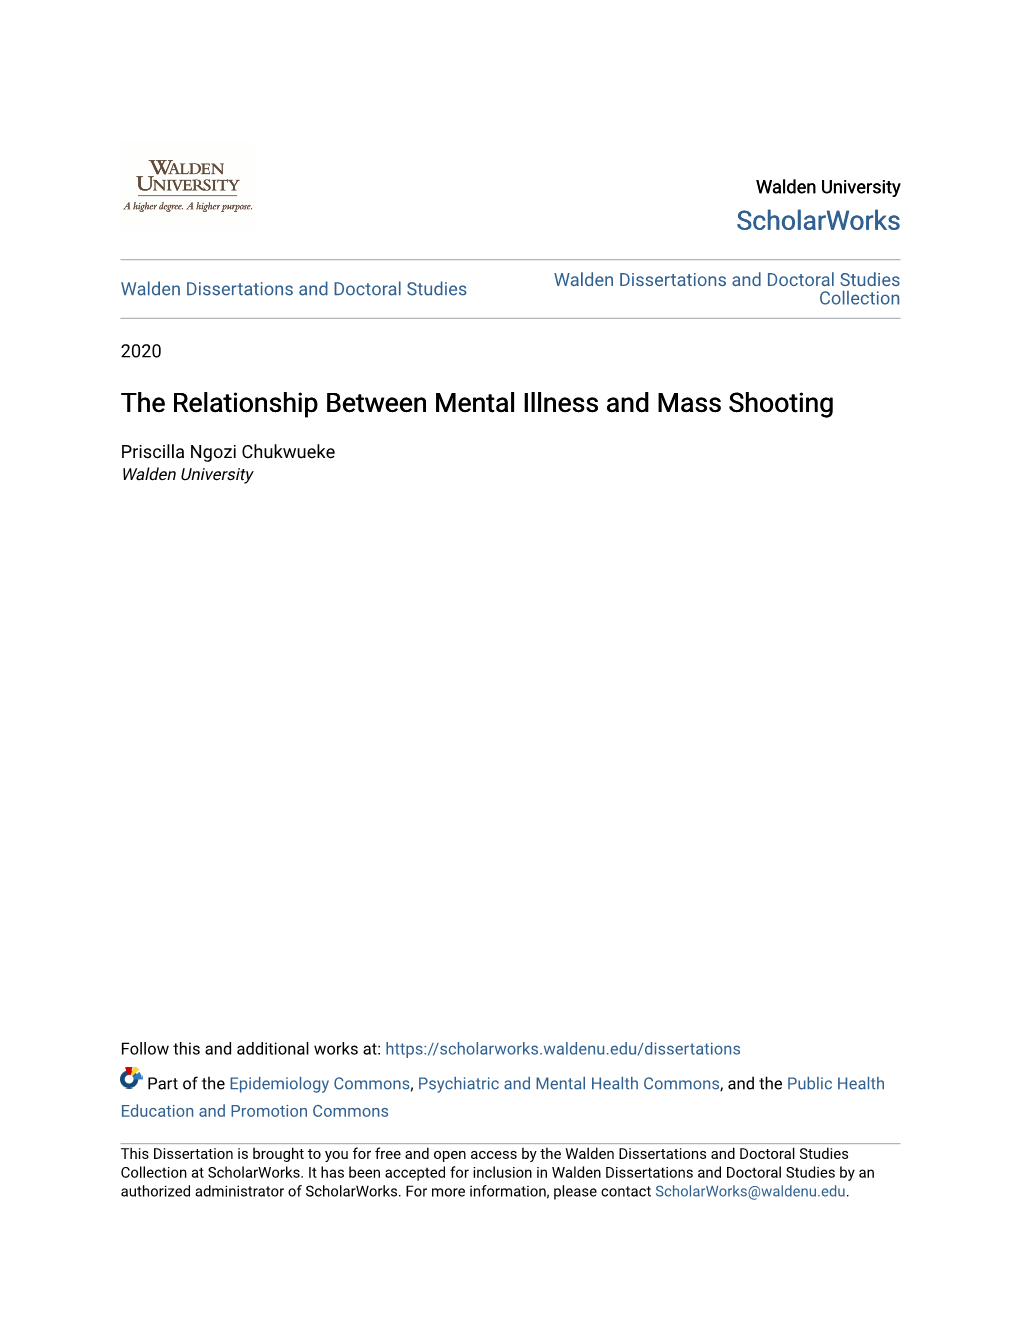 The Relationship Between Mental Illness and Mass Shooting